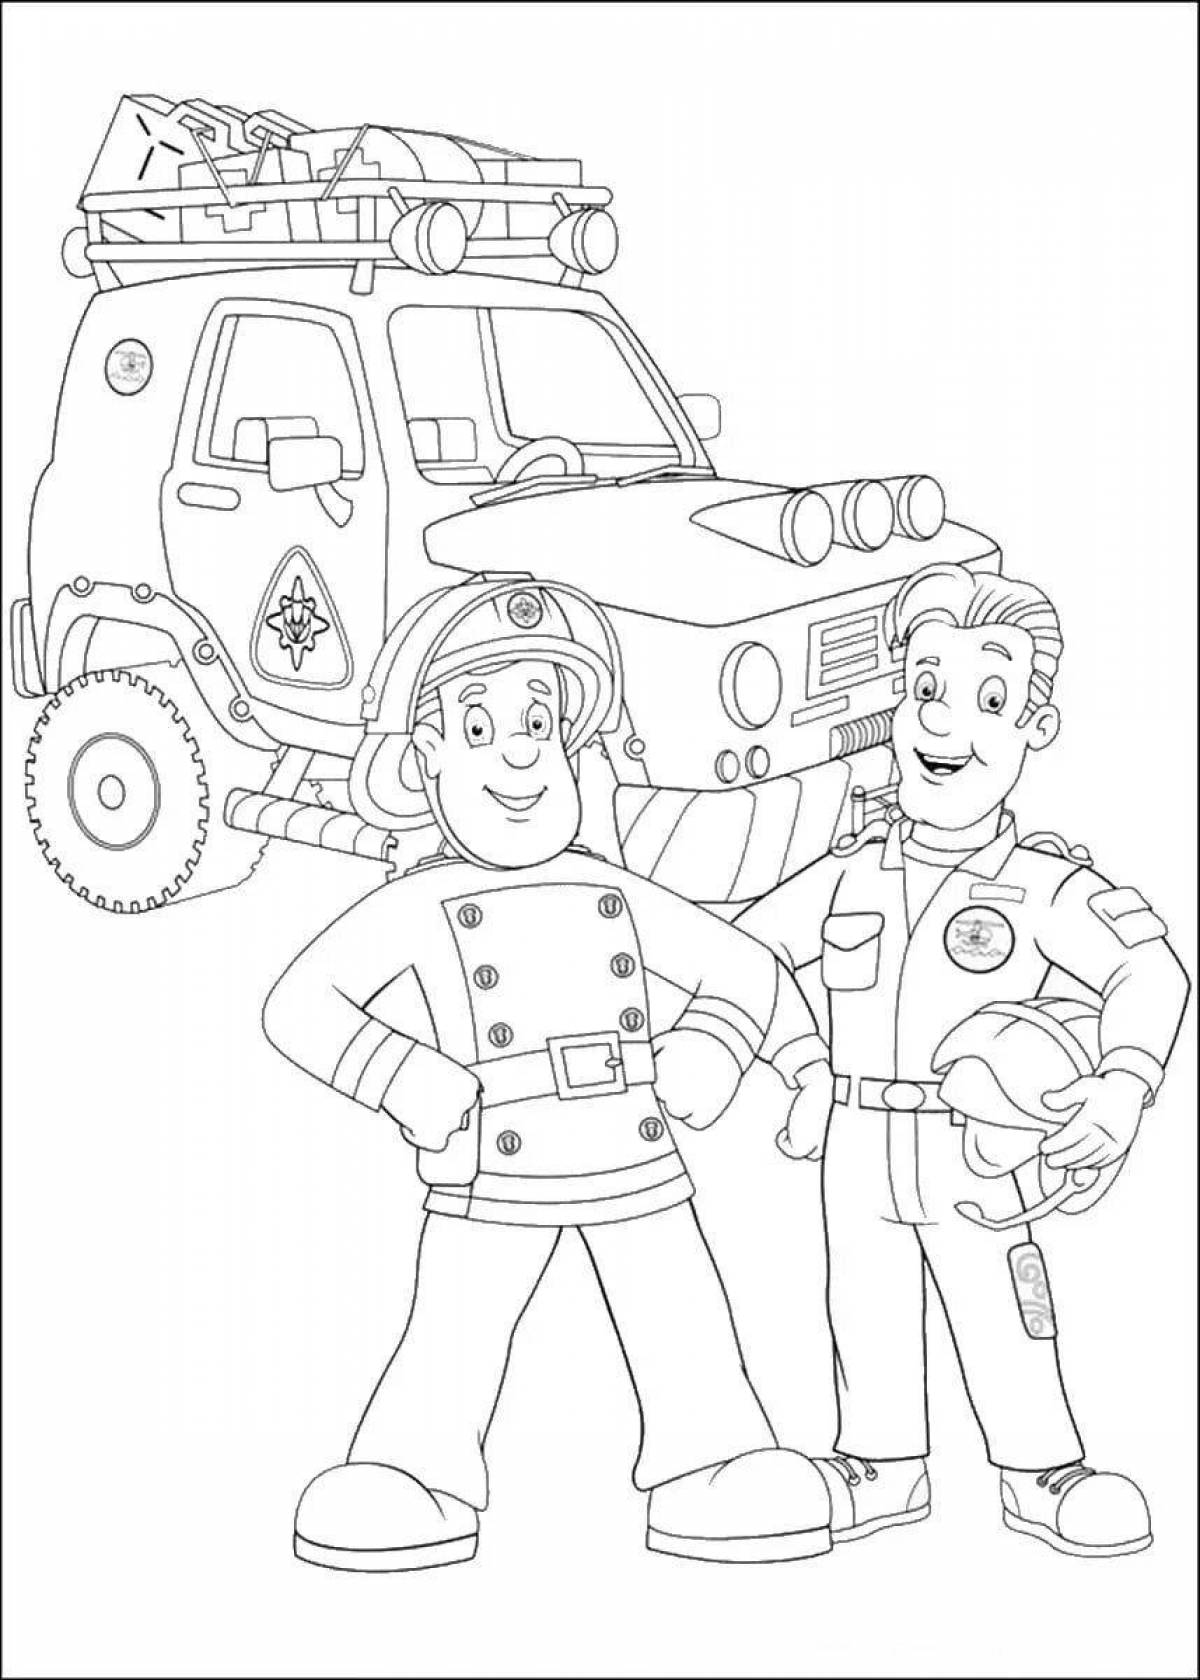 Amazing emergency coloring book